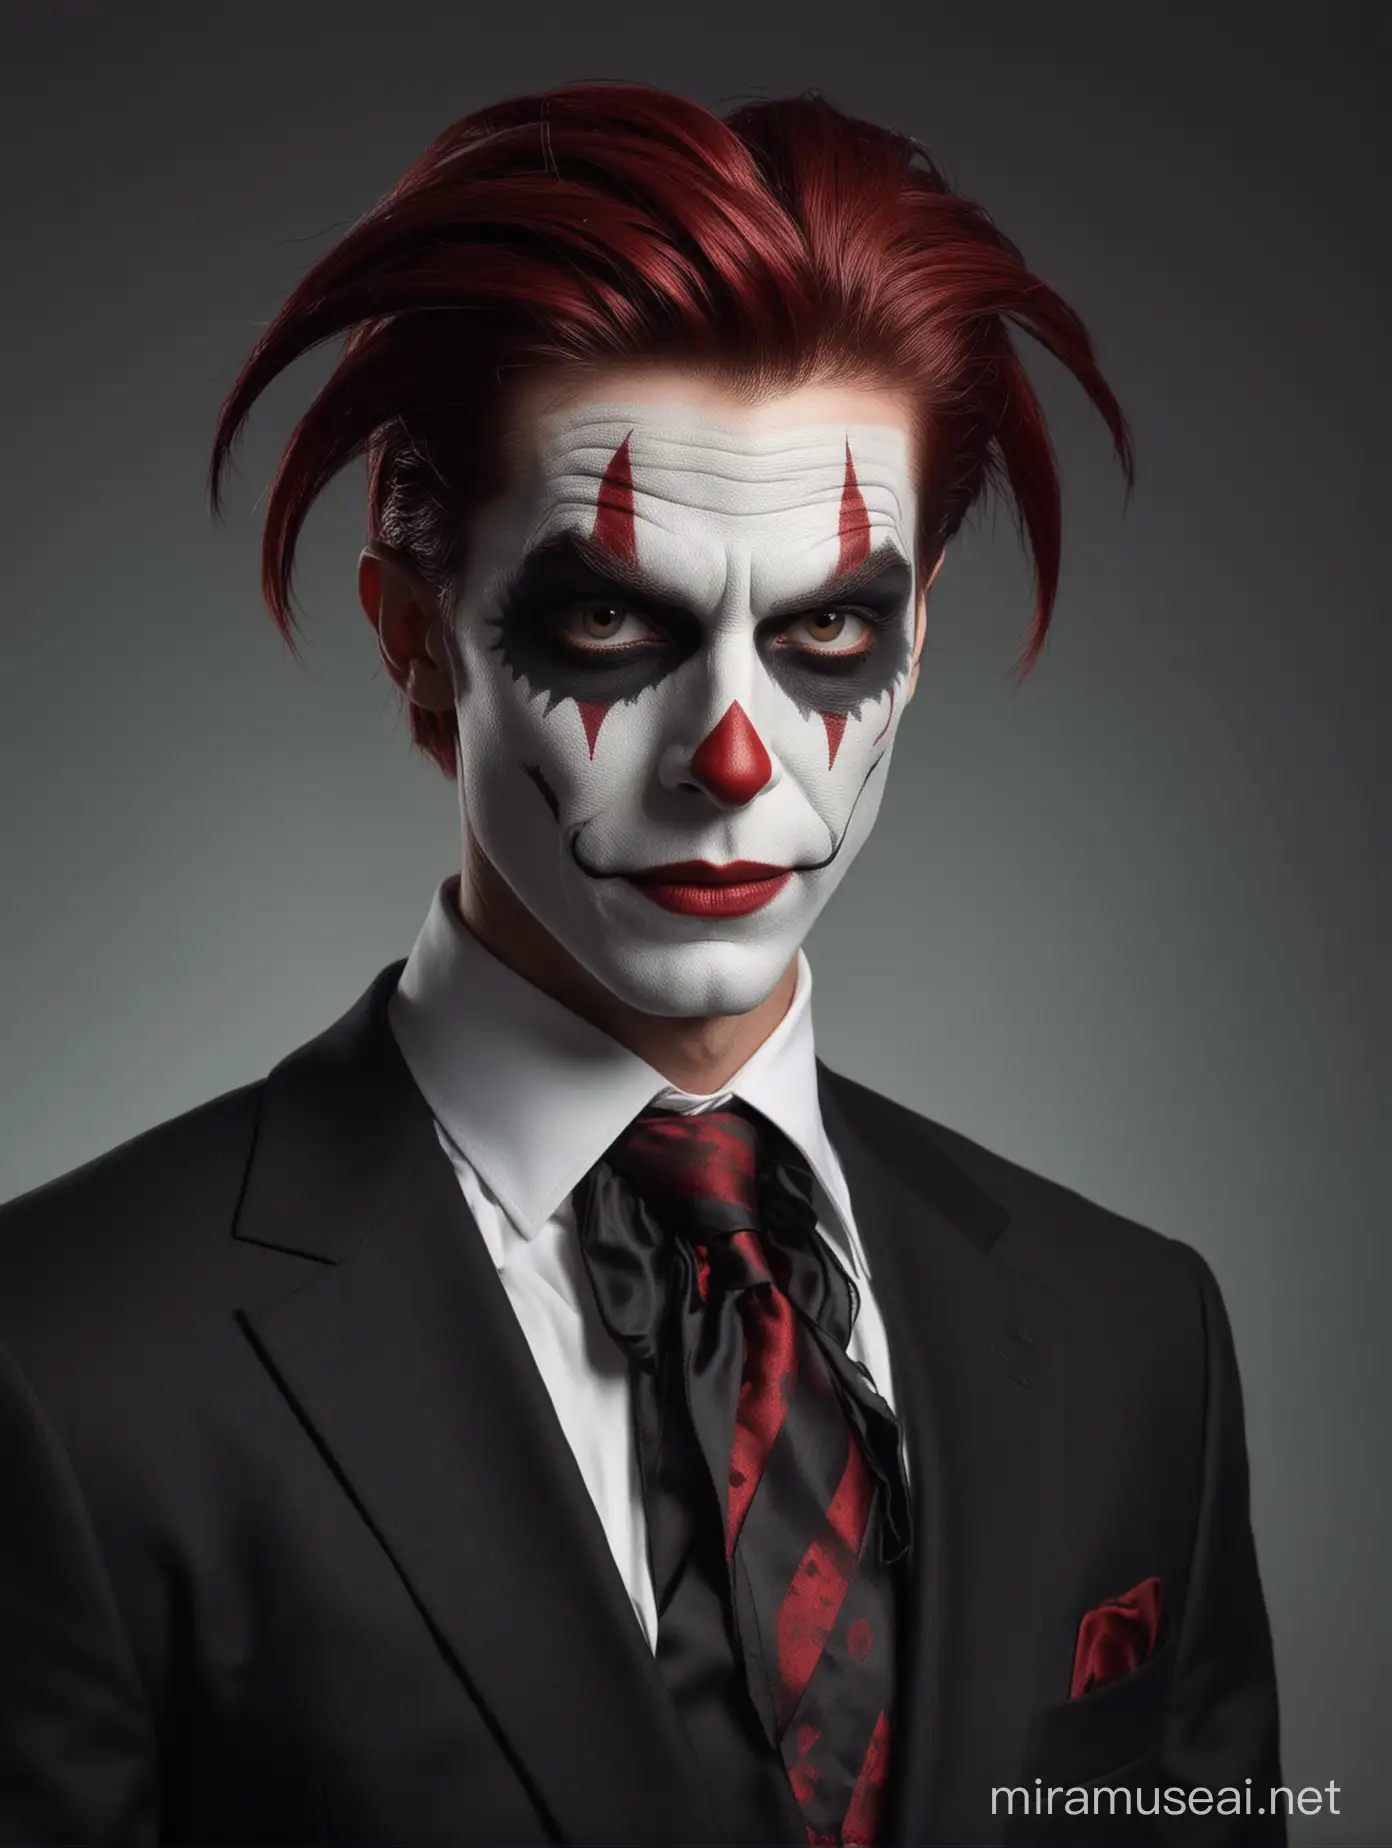 Sinister Jester with Dark Red Hair in Business Attire